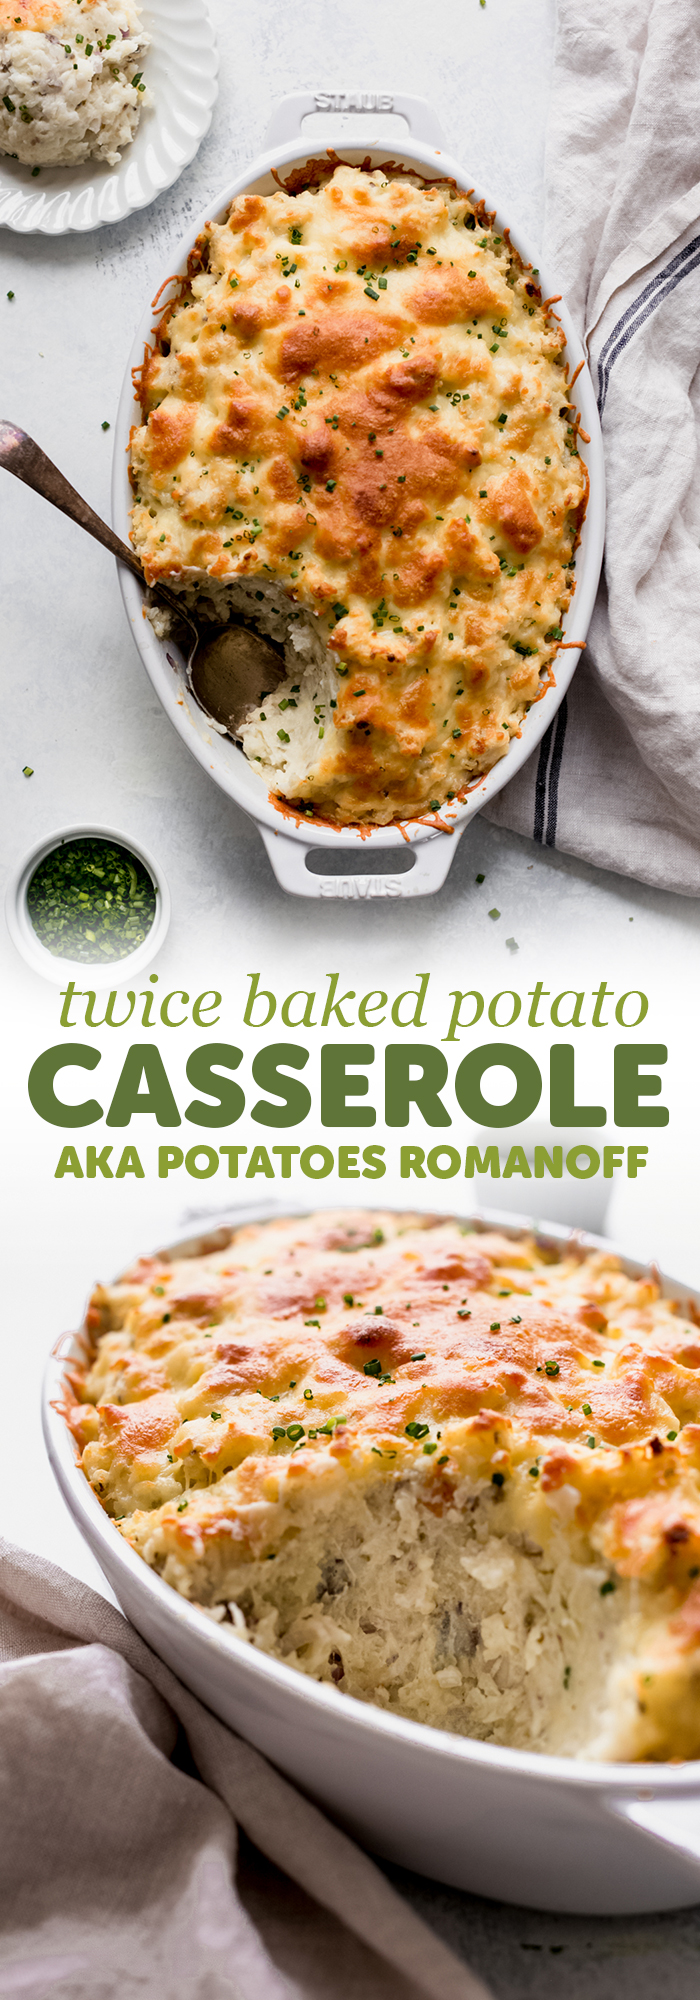 Twice Baked Potato Casserole (Potatoes Romanoff) - Turn regular old baked potatoes into something else special! This is sure to be a hit at Thanksgiving! #potatoesromanoff #twicebakedpotato #twicebakedpotatocasserole | Littlespicejar.com